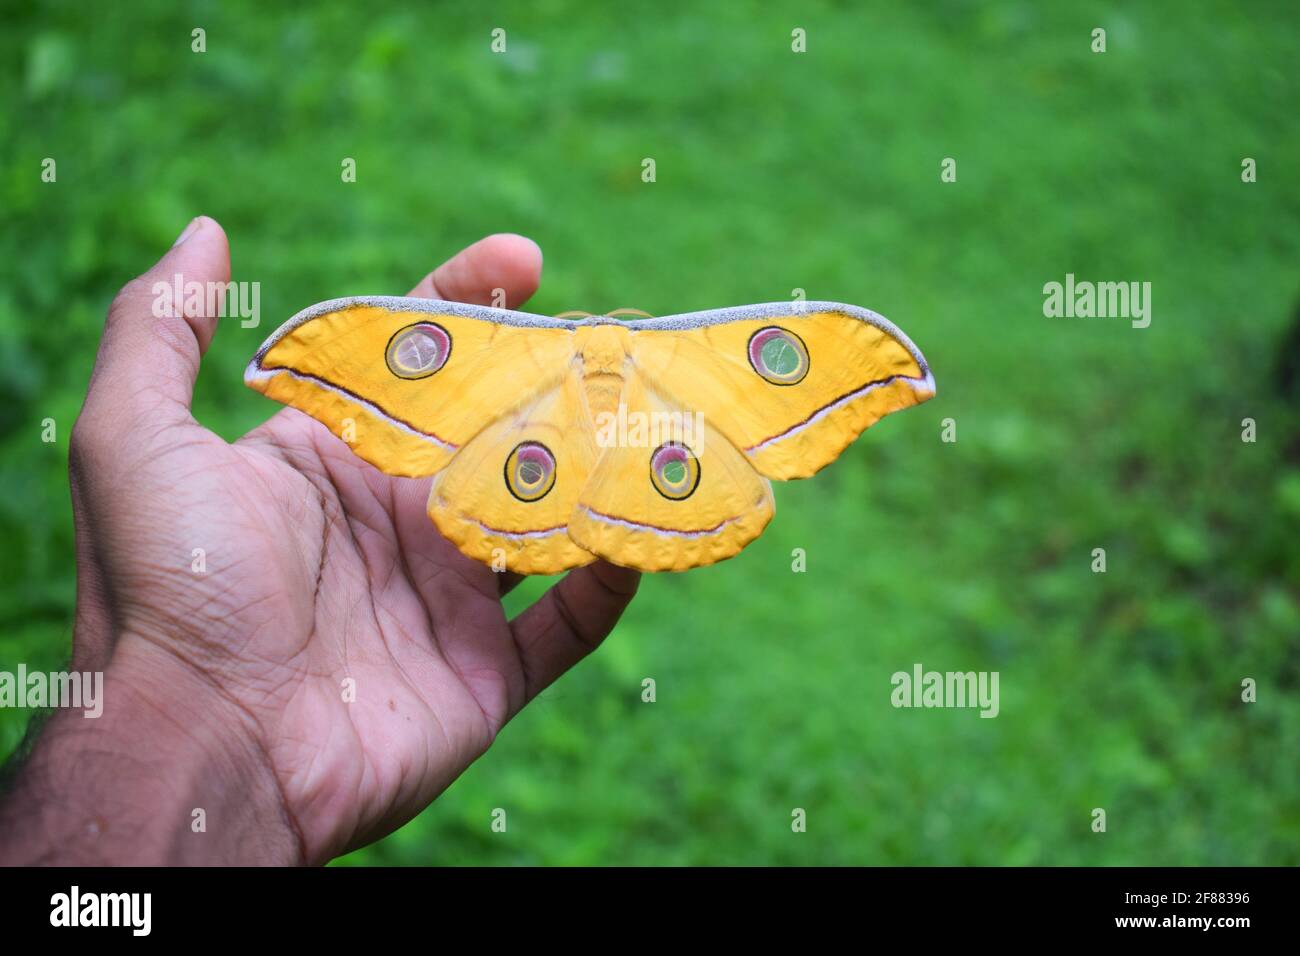 yellow brush footed butterfly sitting on hand in green grass background Stock Photo